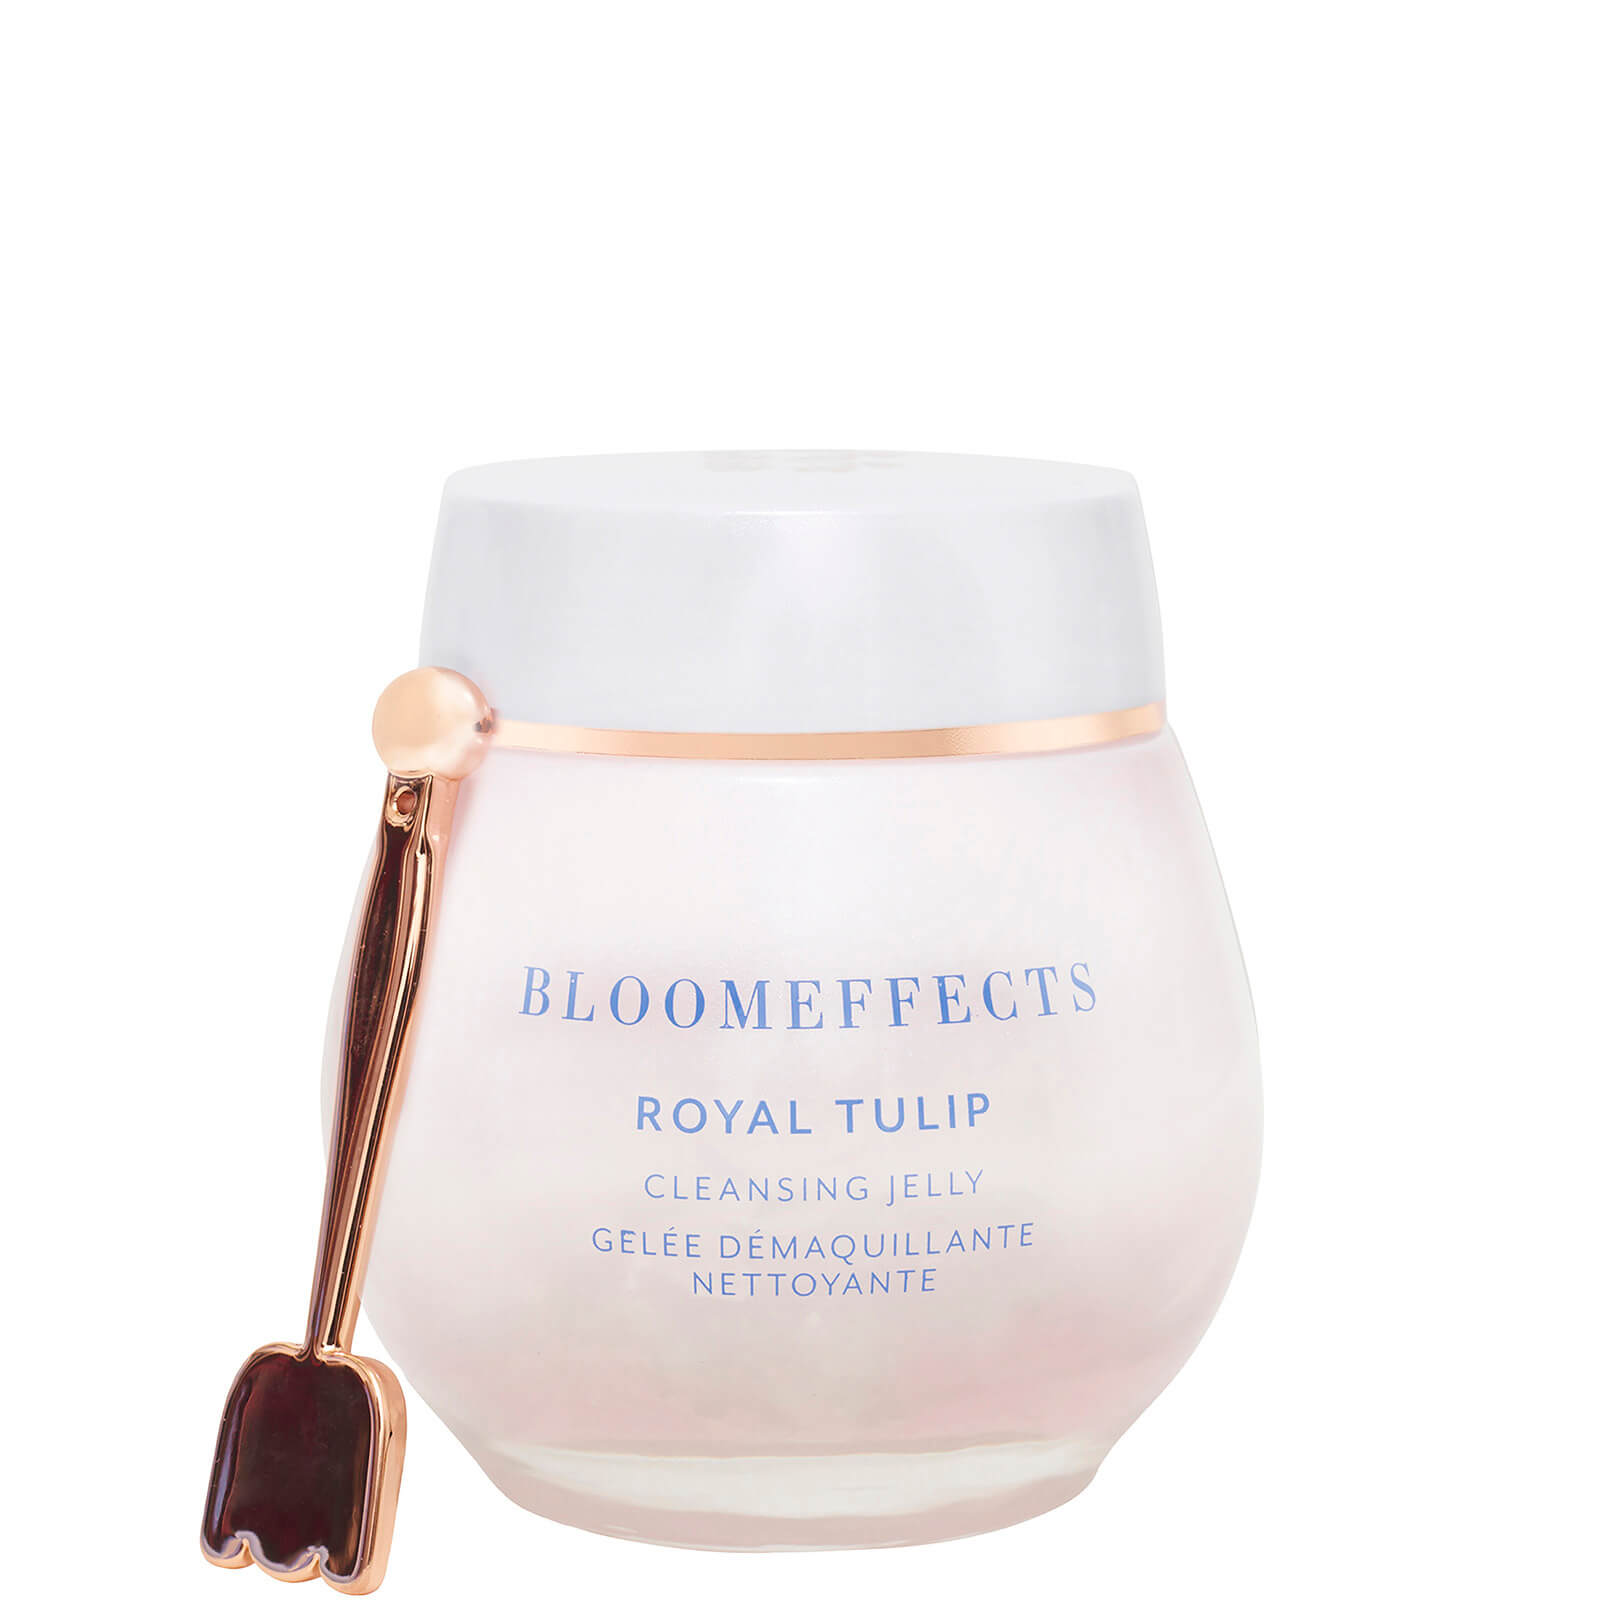 BLOOMEFFECTS ROYAL TULIP CLEANSING JELLY 80ML,BE0001